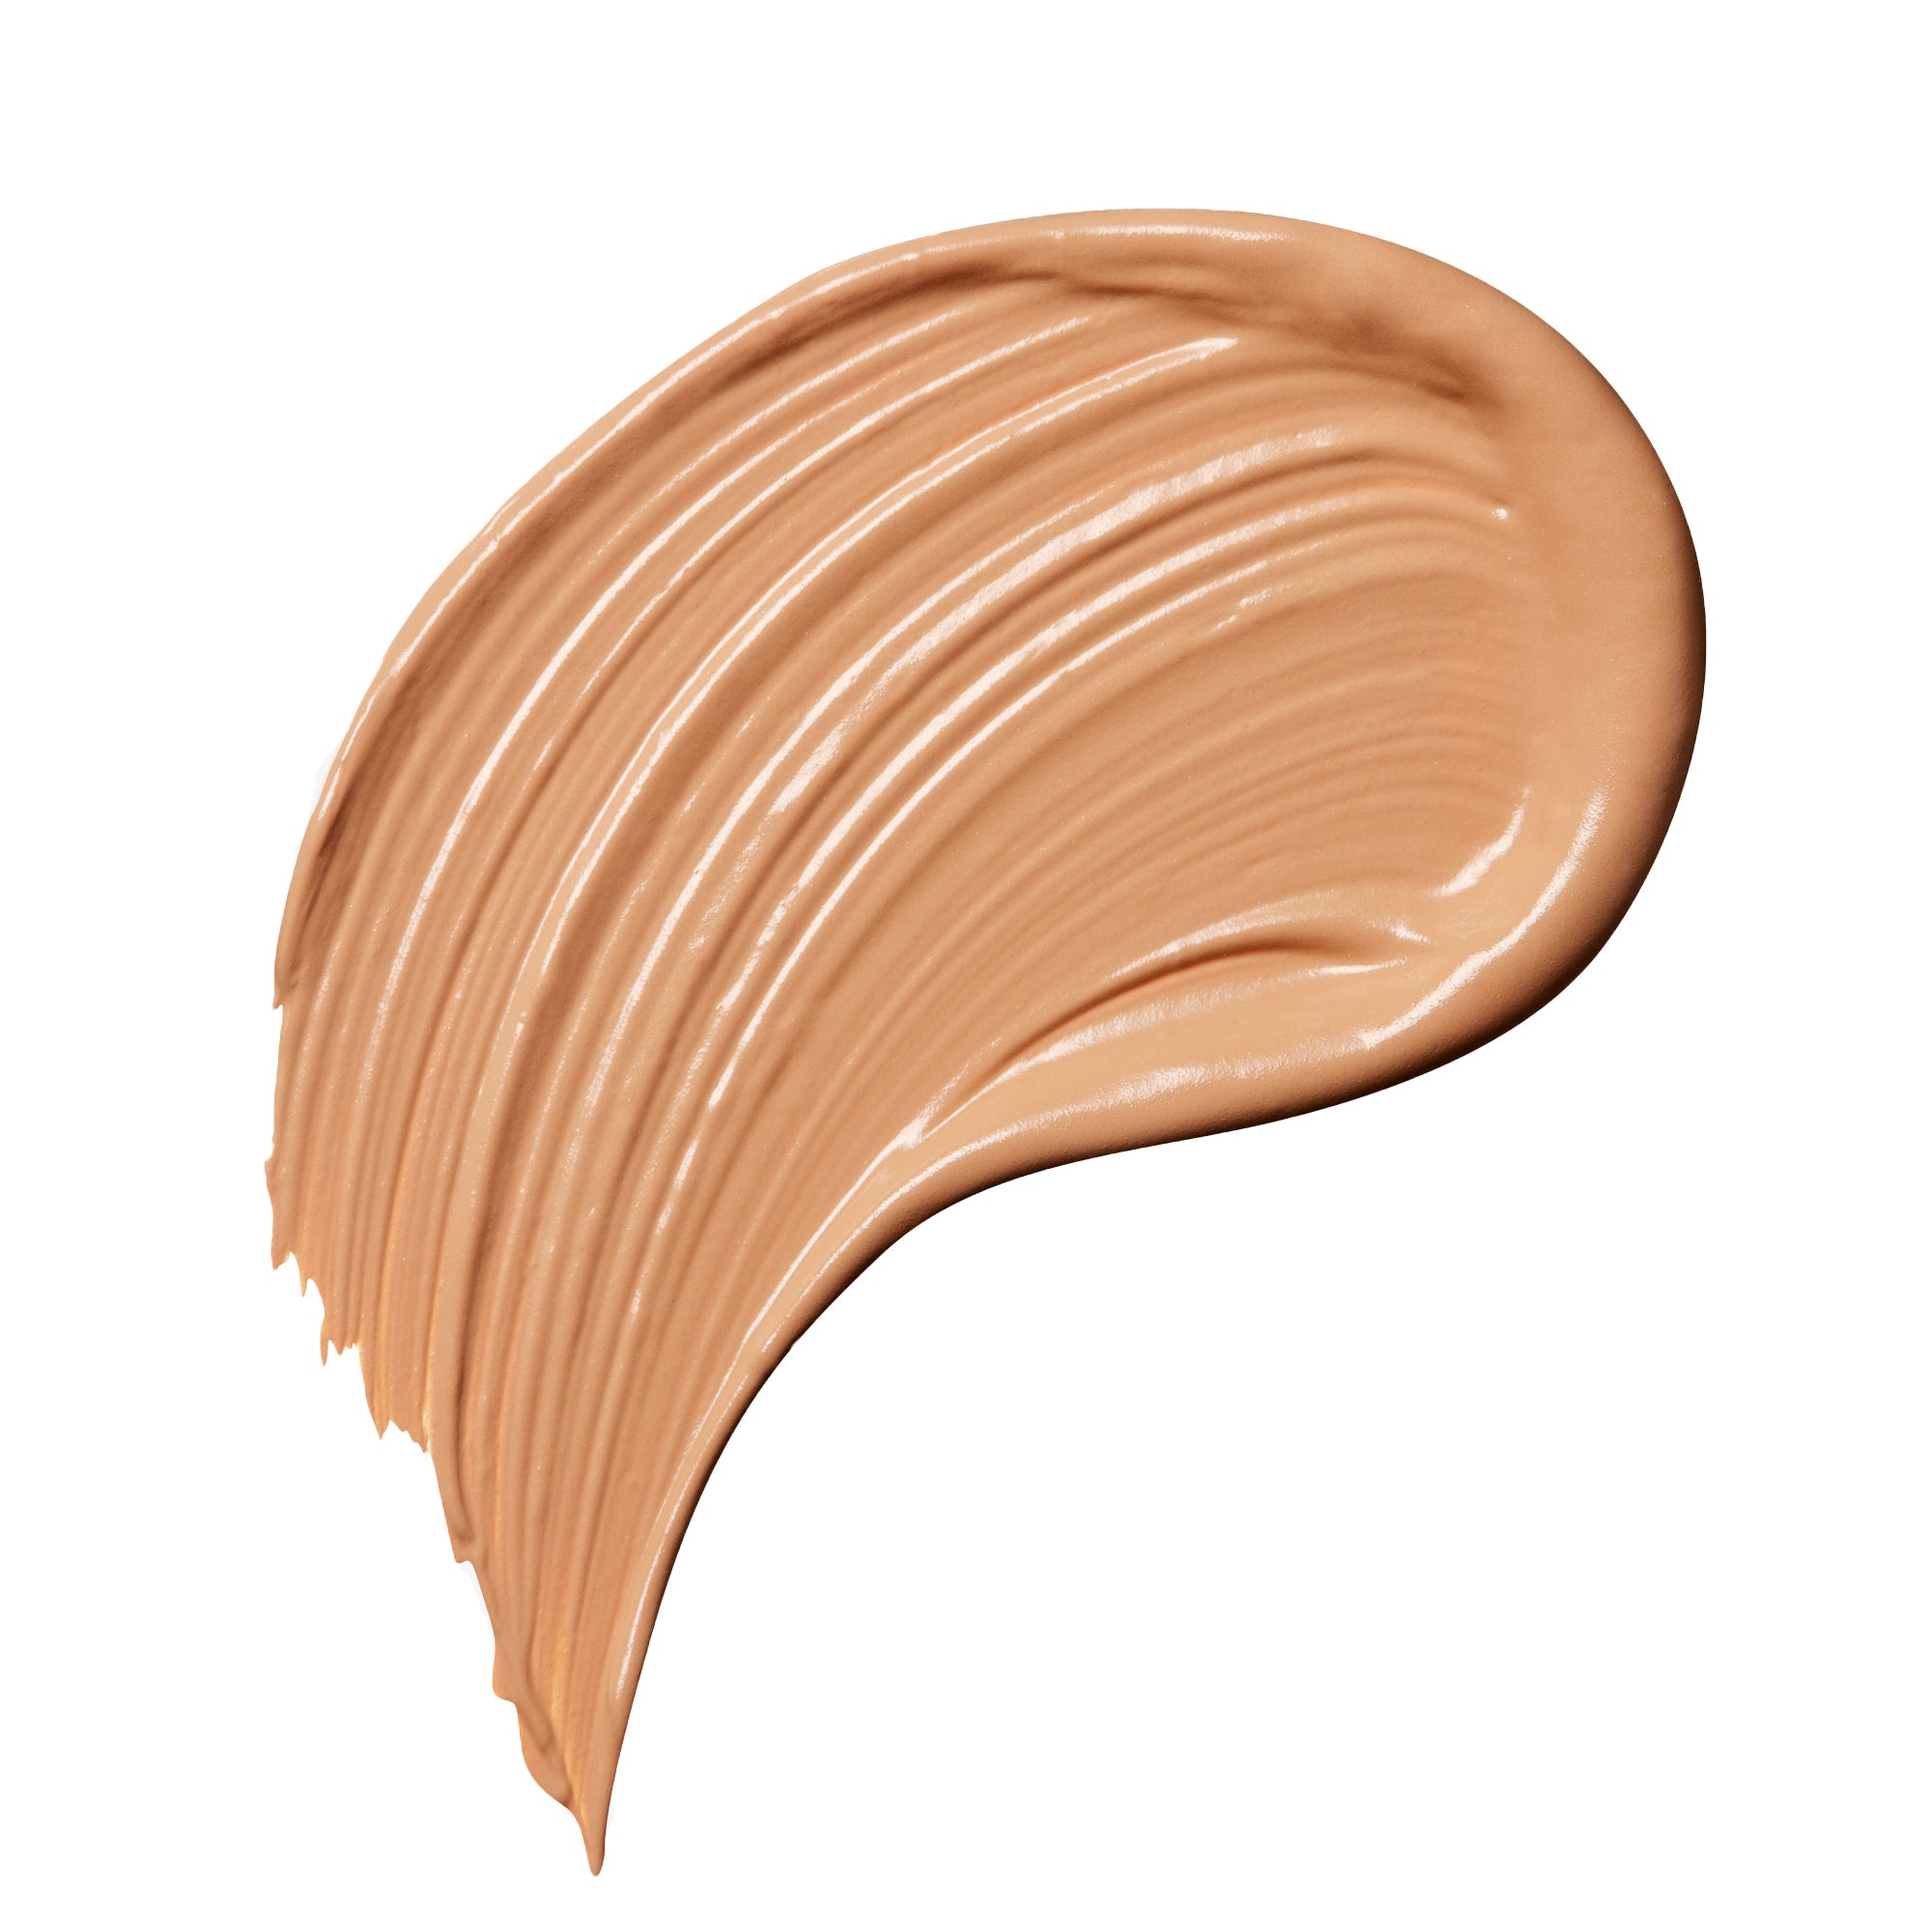 Rodial Glass Concealer / Shade 04 / Swatch